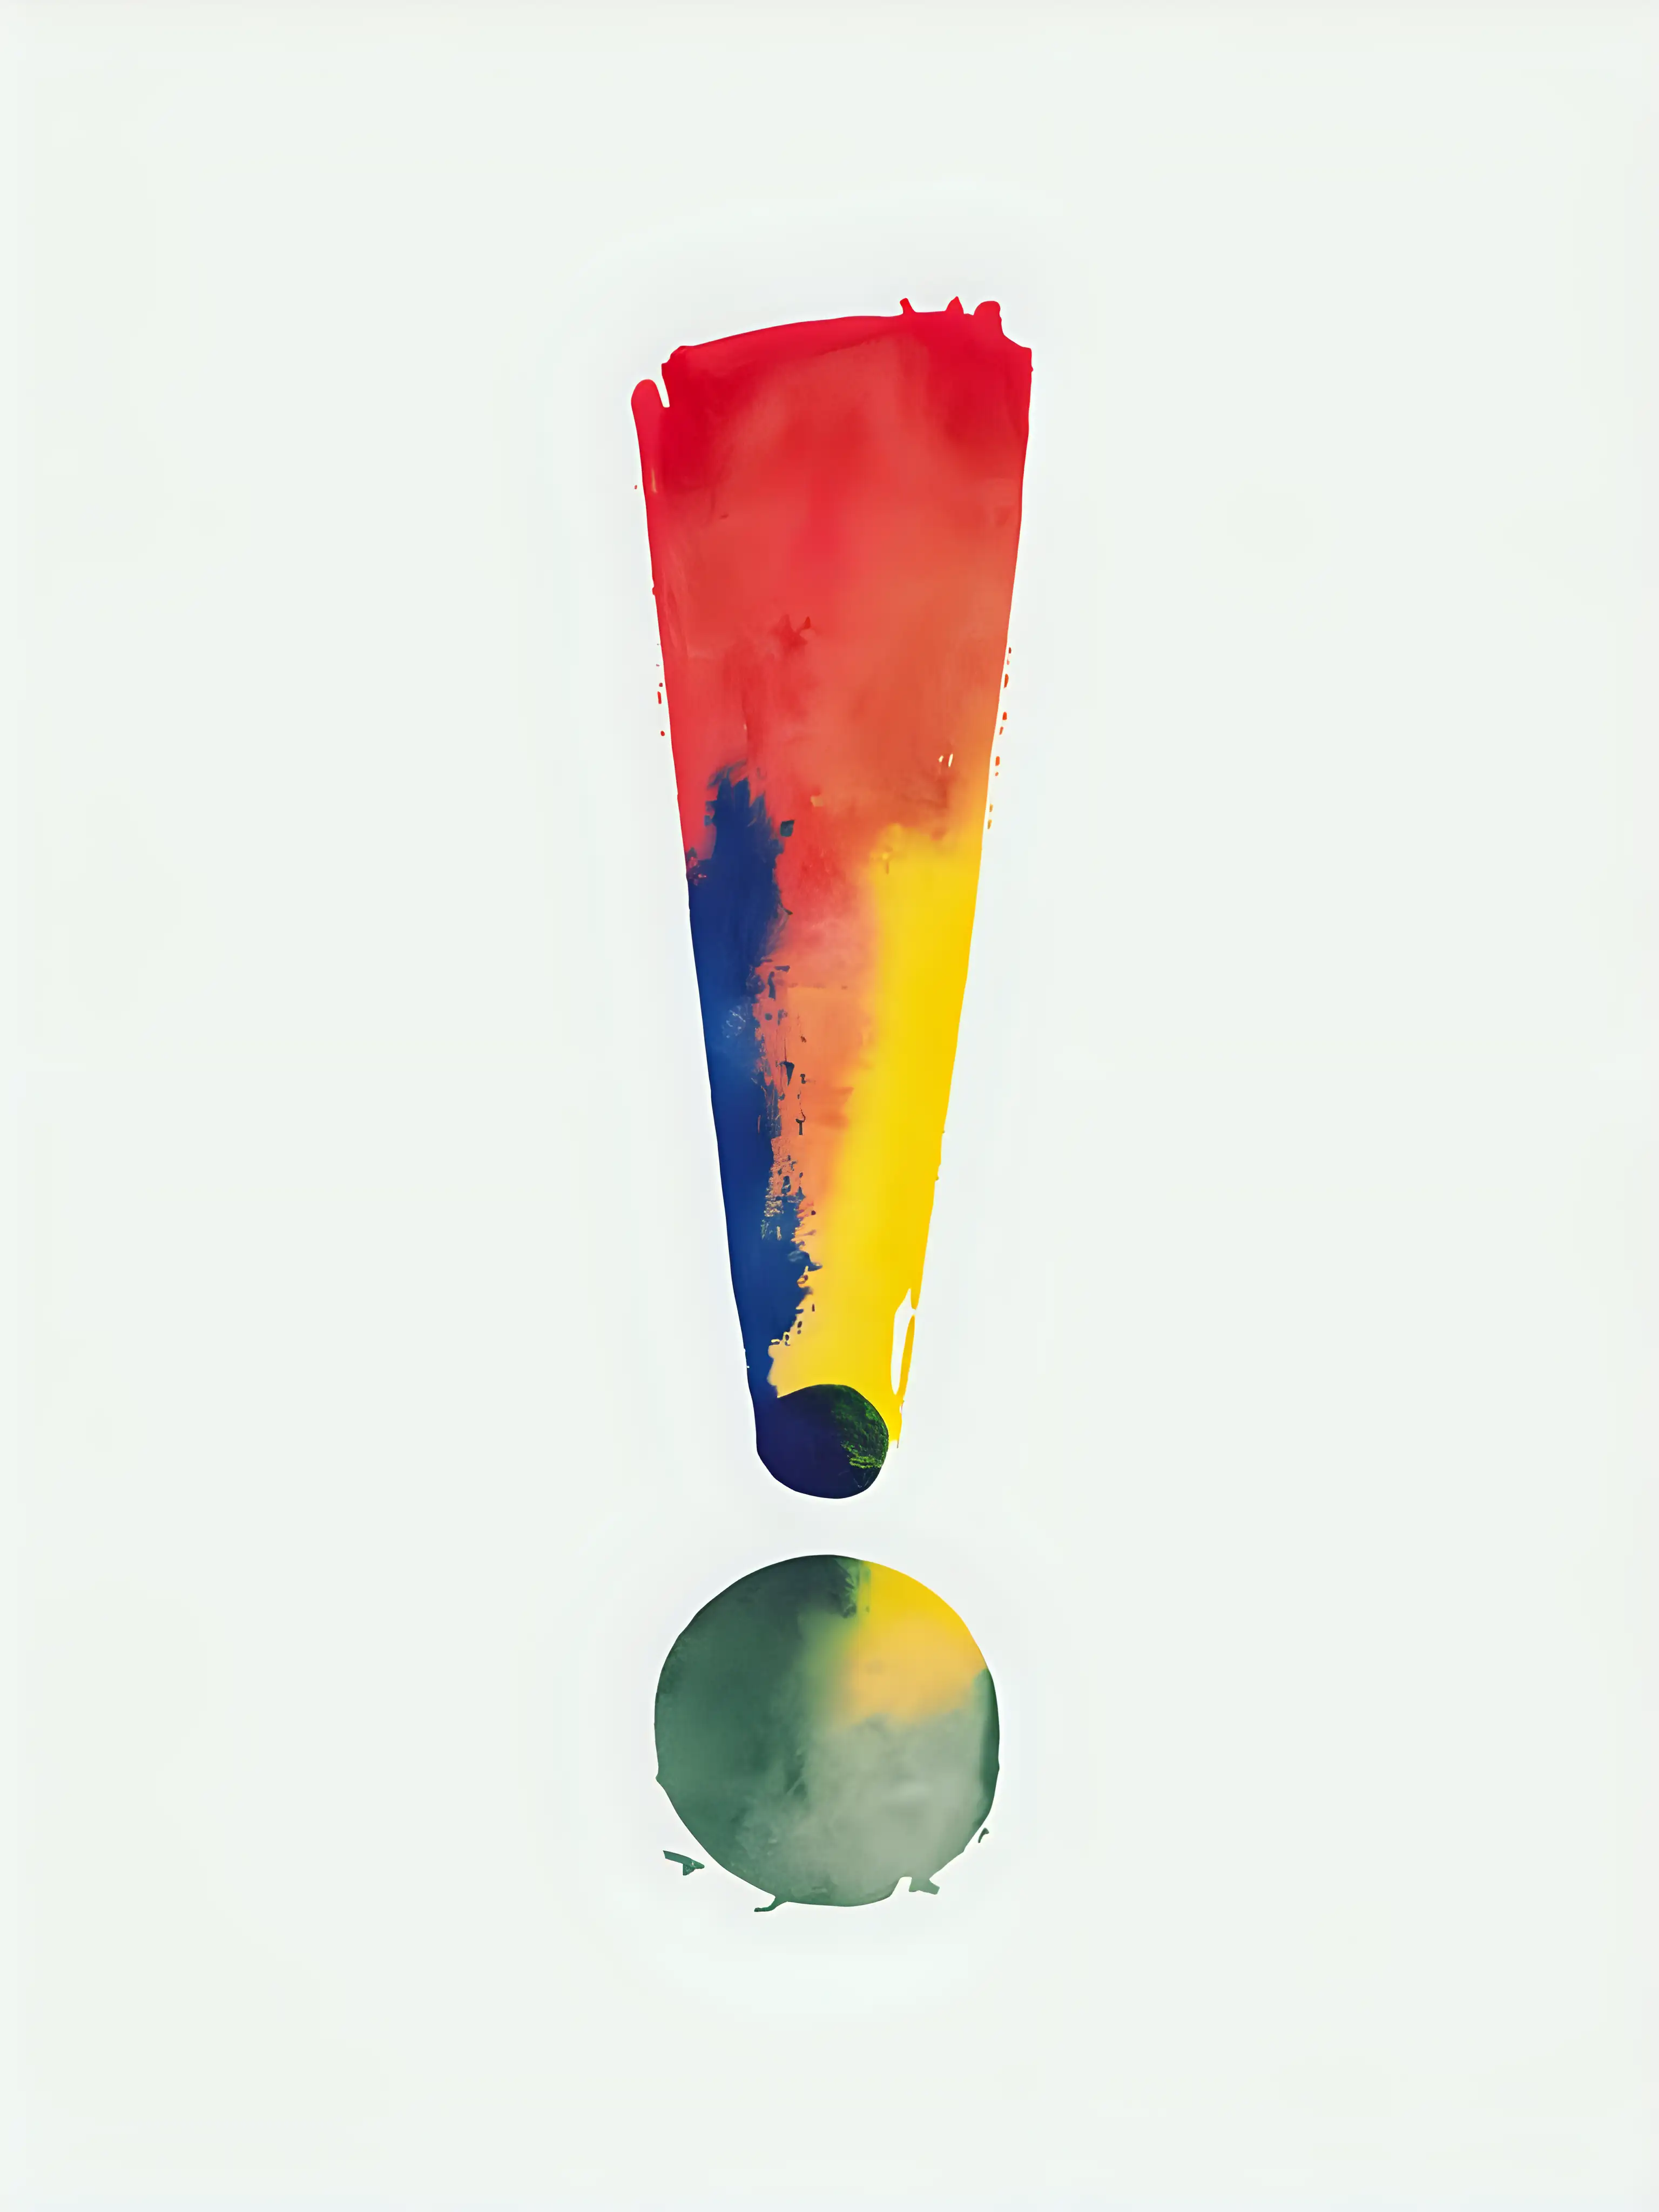 A single, captivating red, blue, yellow and green clean, artistic, symbolic, colorful, expressive, minimalist, watercolor, illustration of an exclamation point.